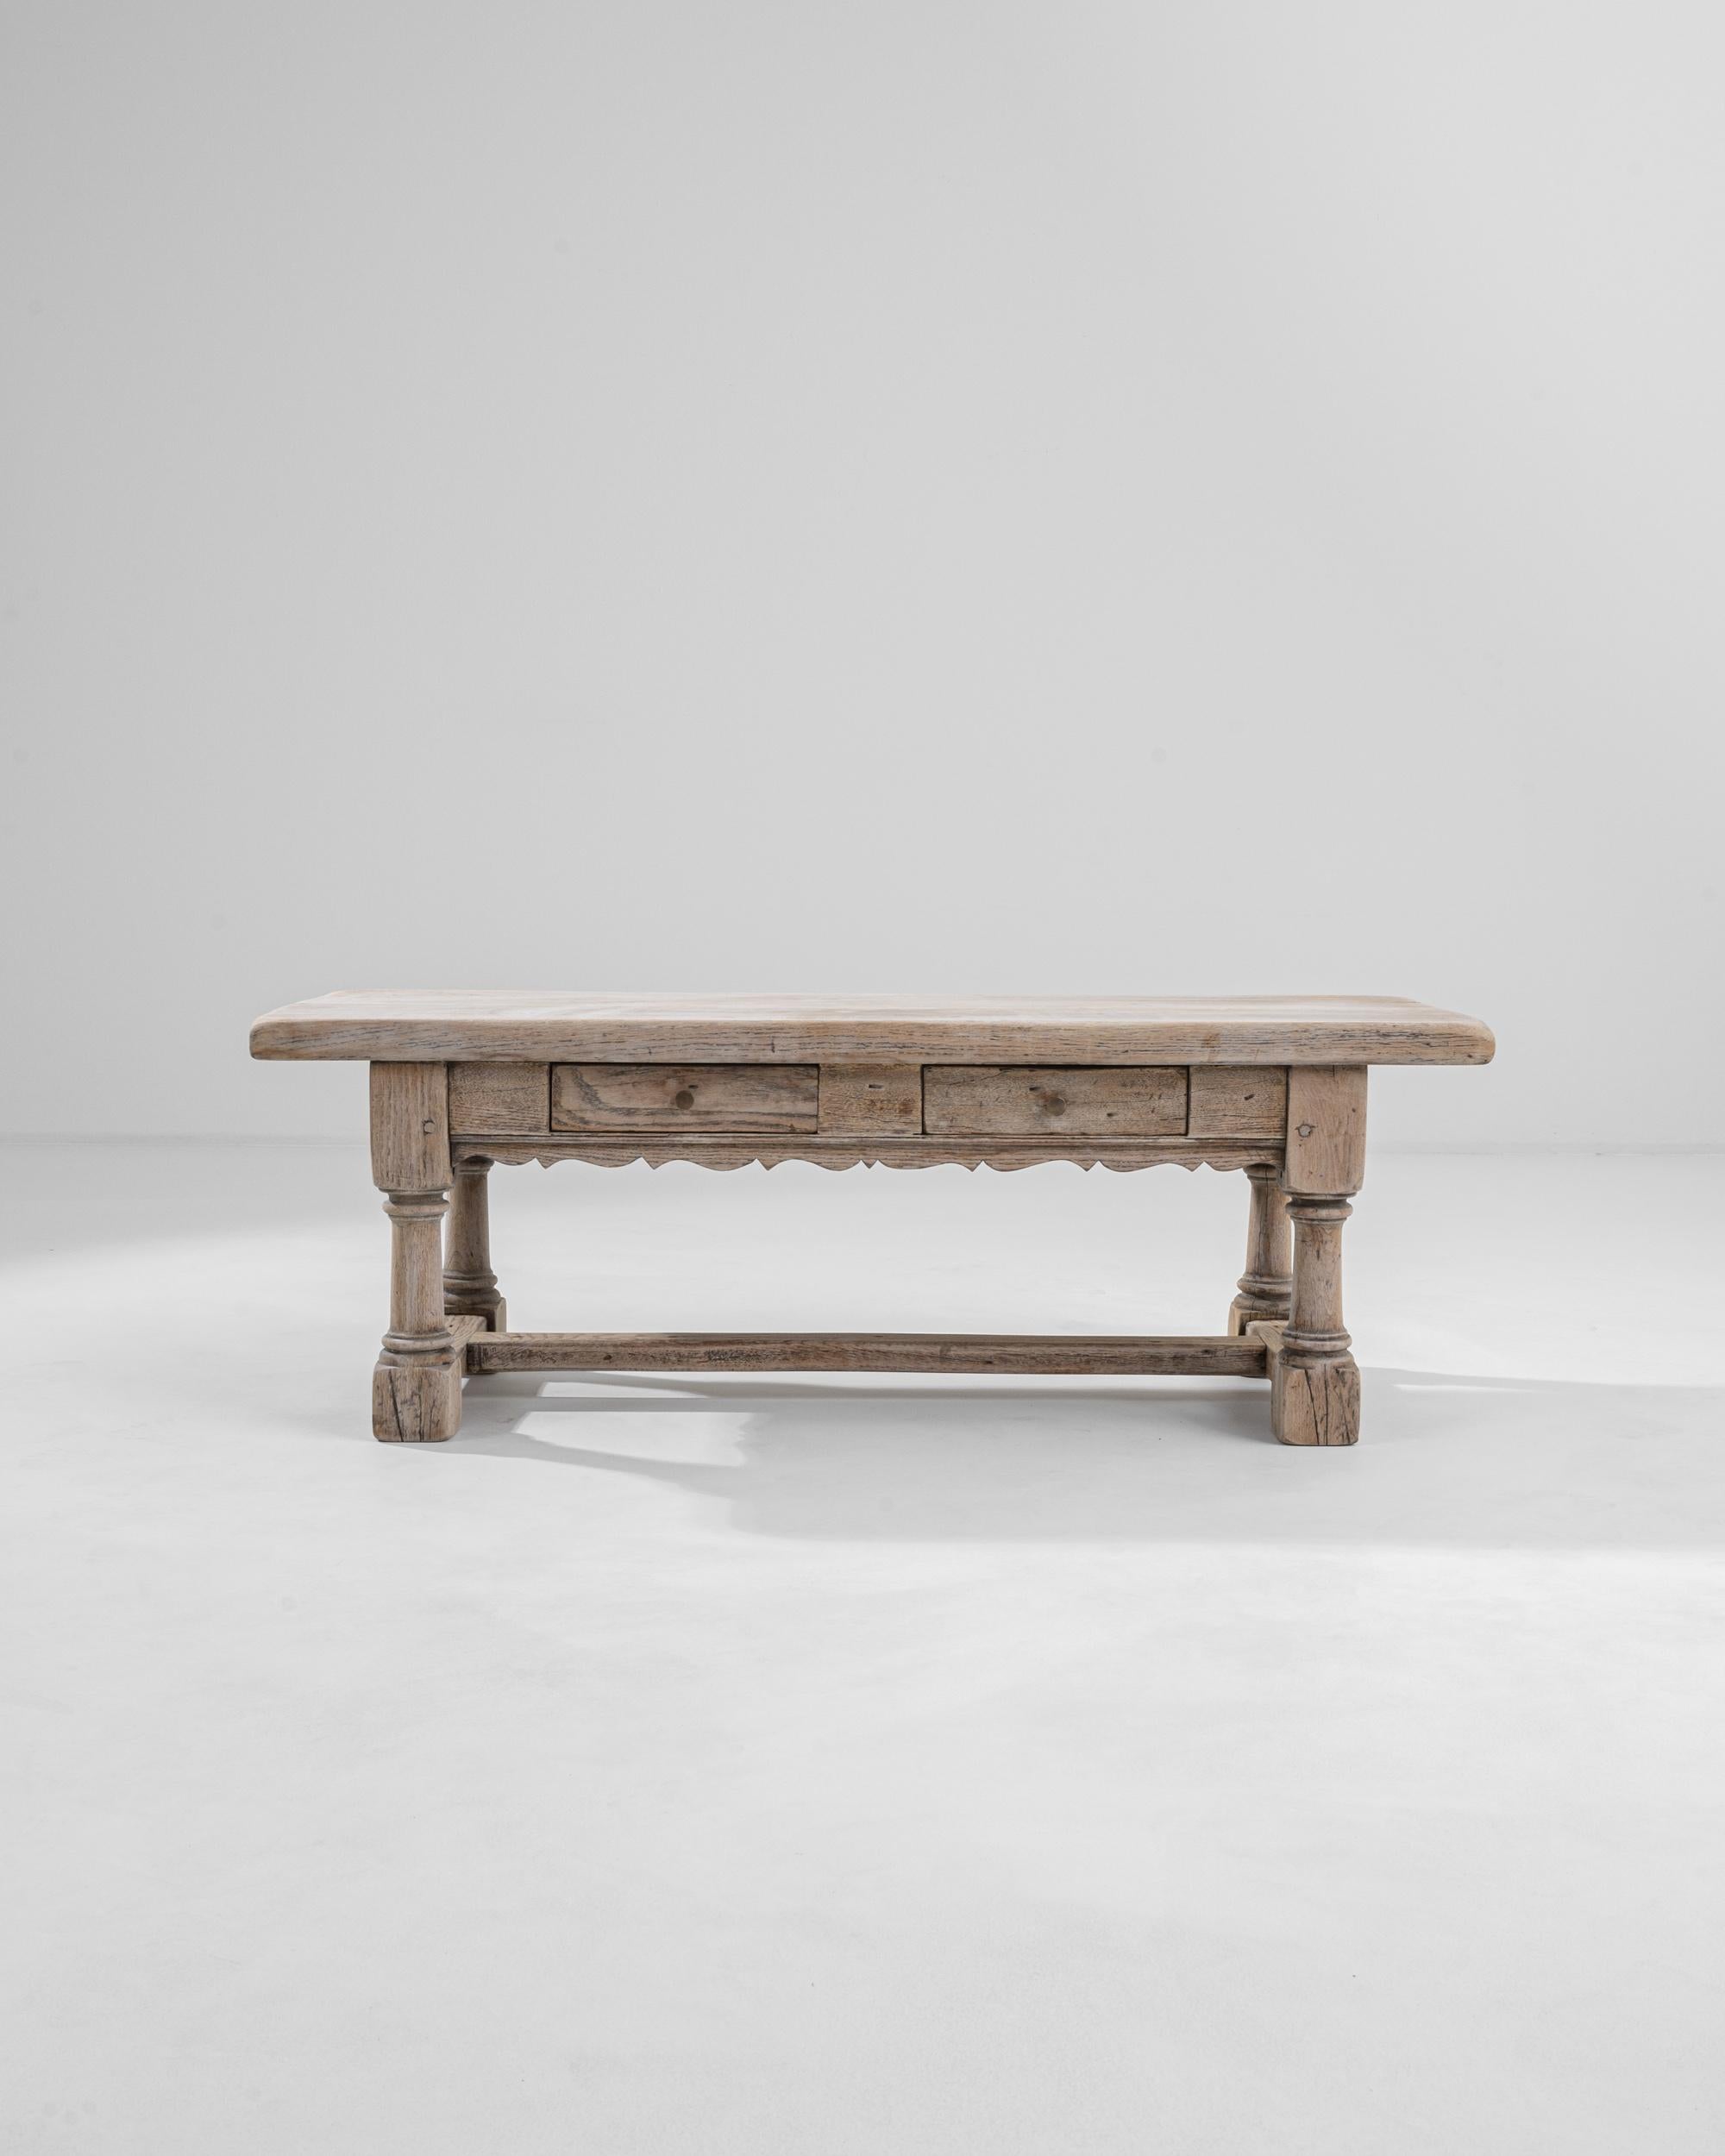 This Provincial oak coffee table evokes the pleasures of hearth and home. Made in Belgium in the 20th century, the design recreates the farmhouse tables of country households in miniature. A solid tabletop sits atop legs carved into the shape of